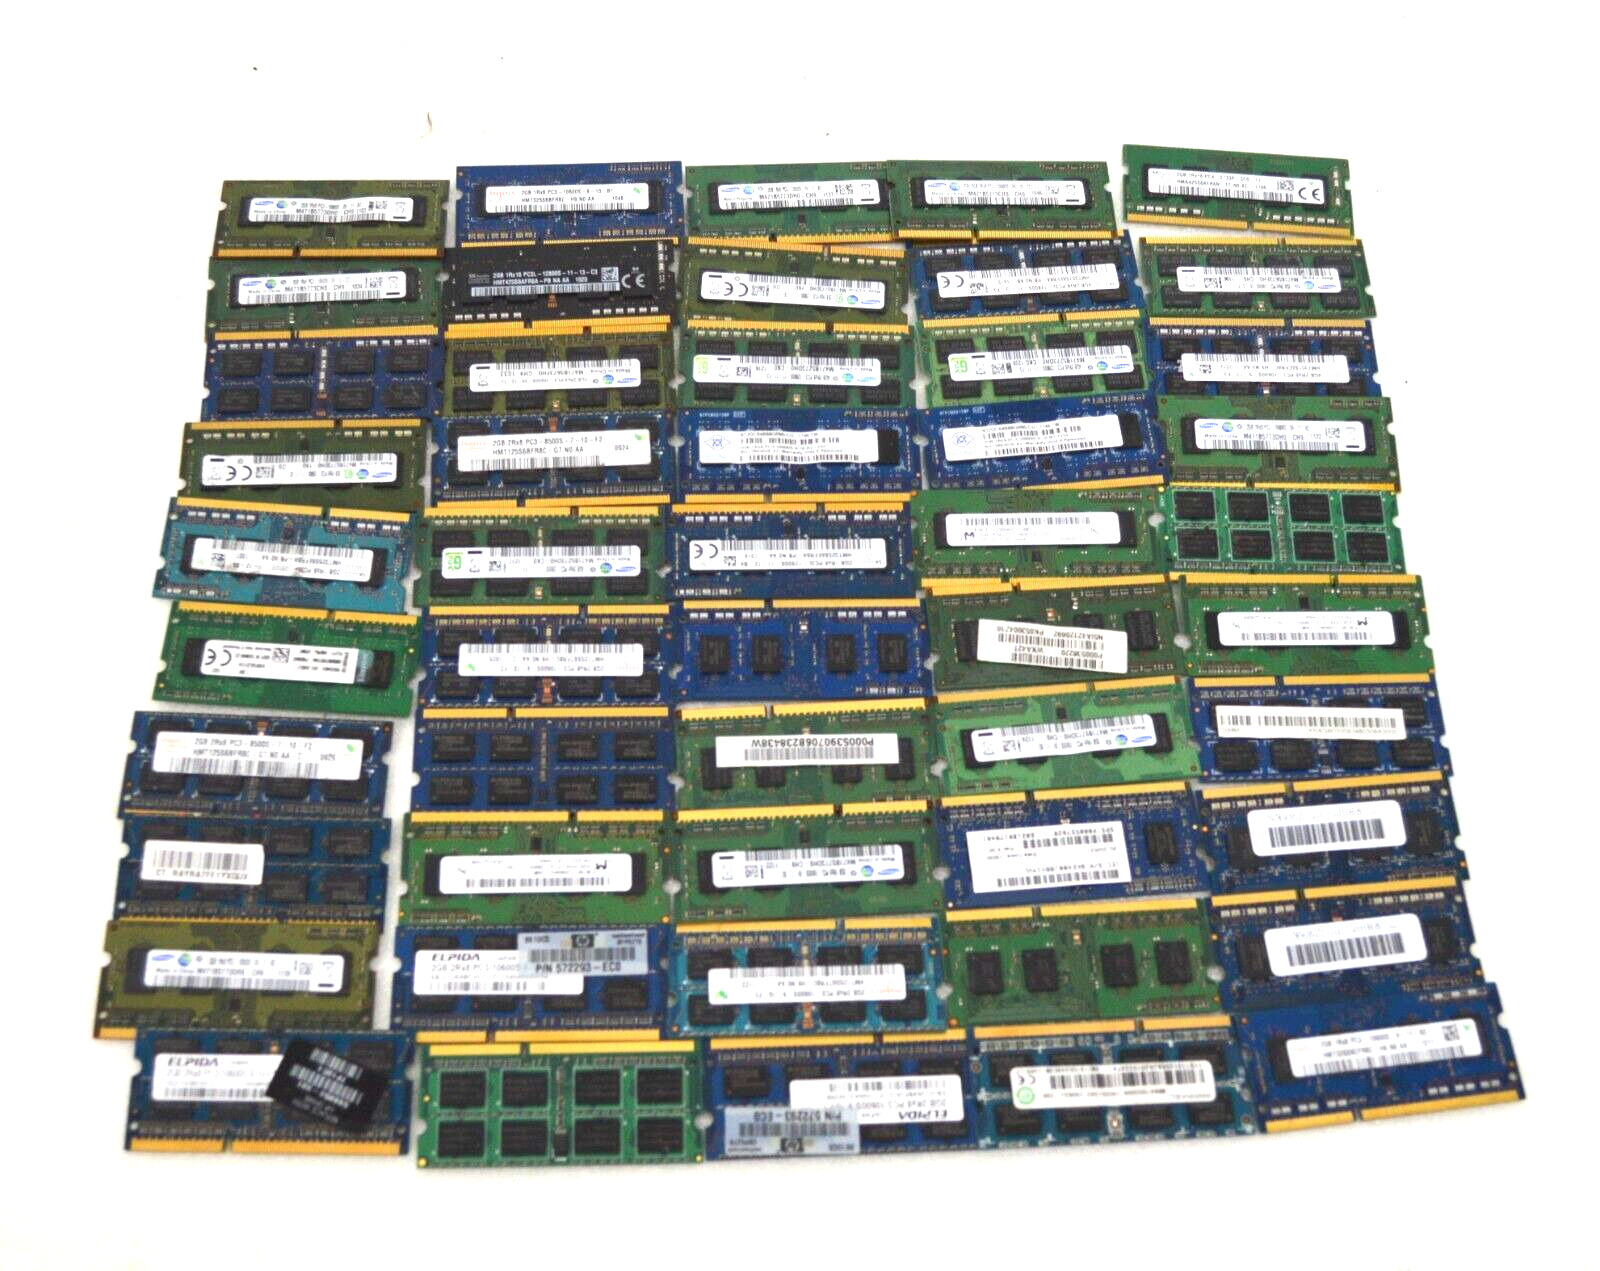 Lot of 250 x 2GB mixed brands and types Ram Memory DDR3 SODIMM LAPTOP MEMORY